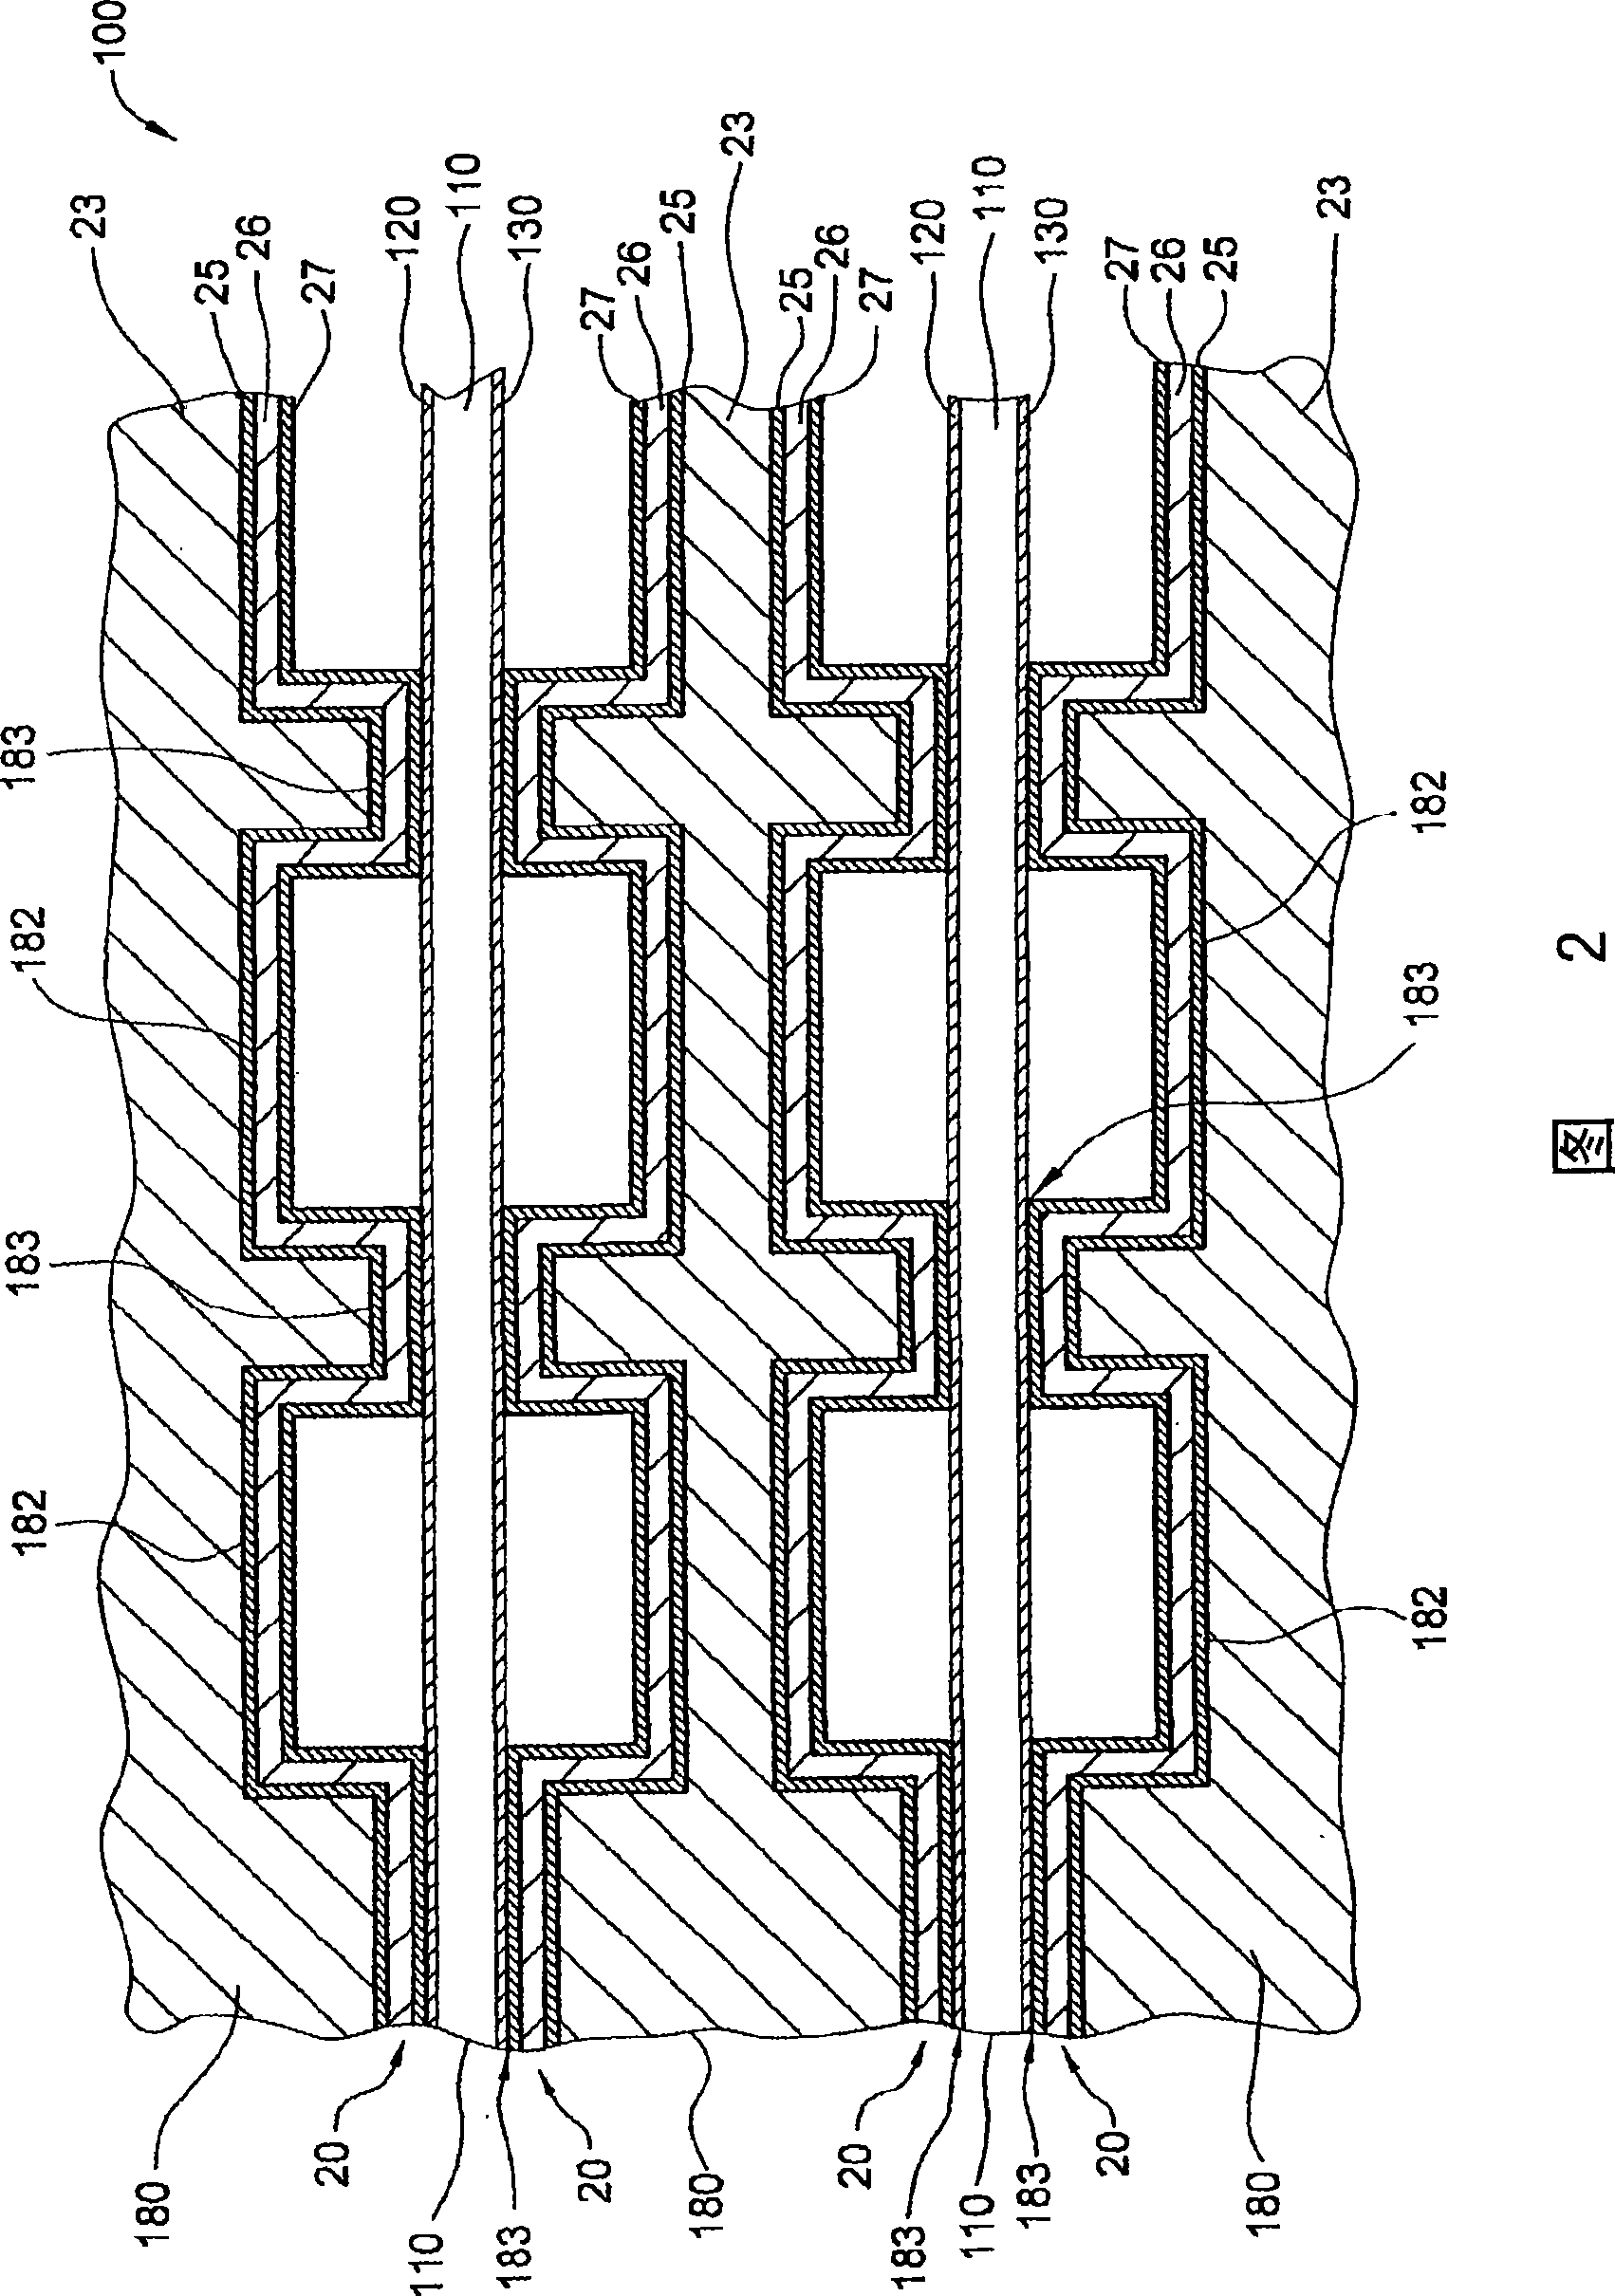 Reliable fuel cell electrode design